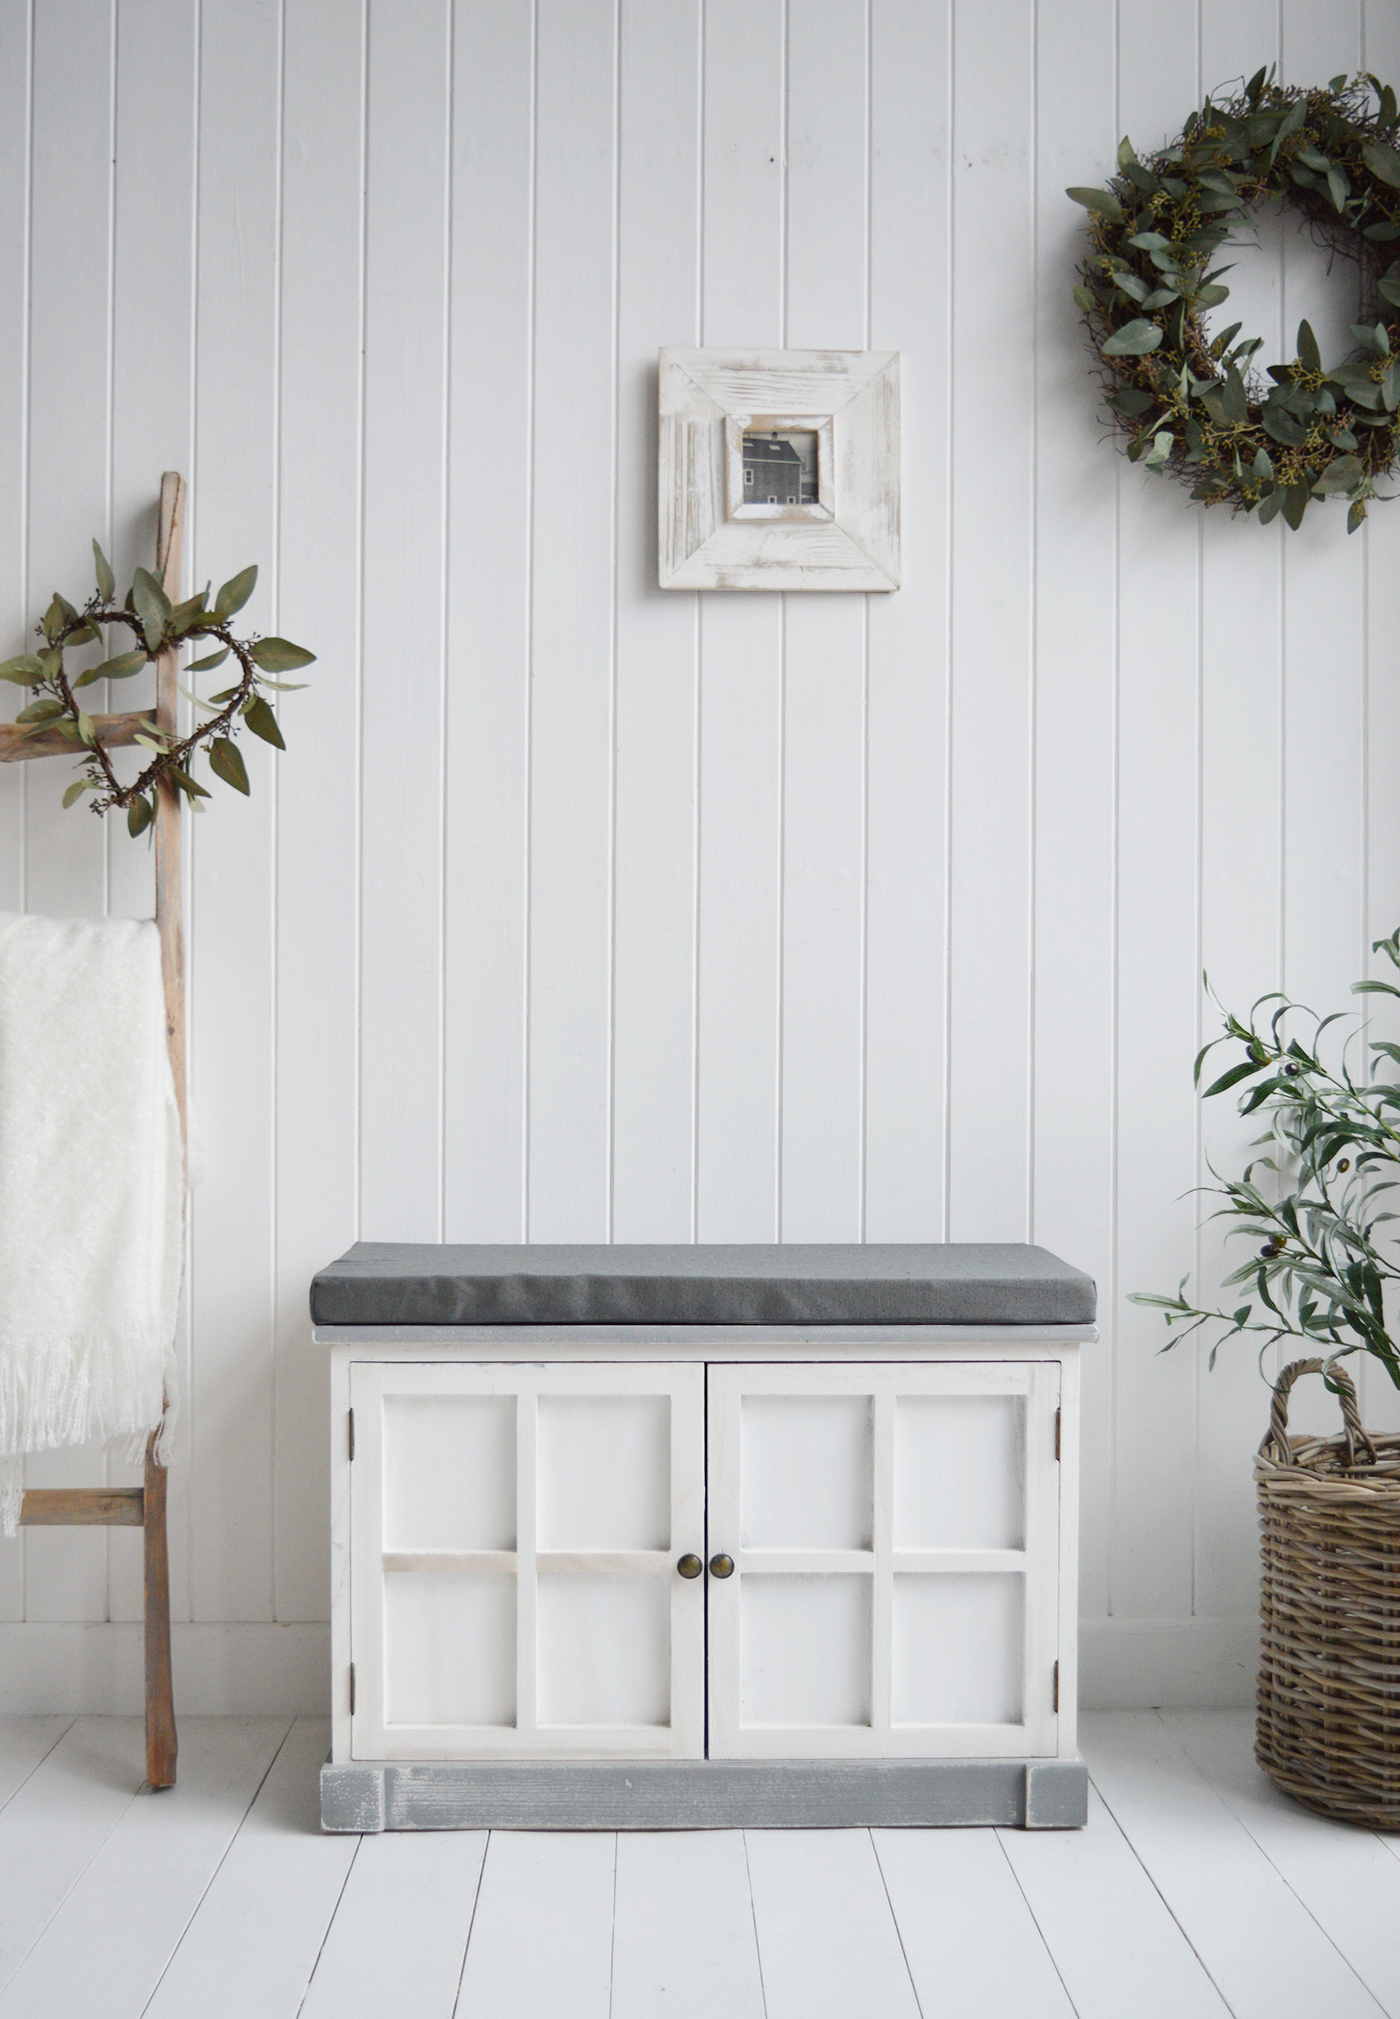 Charlotte White Wooden Storage Bench with shelves - New England Modern Farmhouse and Coastal Storage Hall Furniture